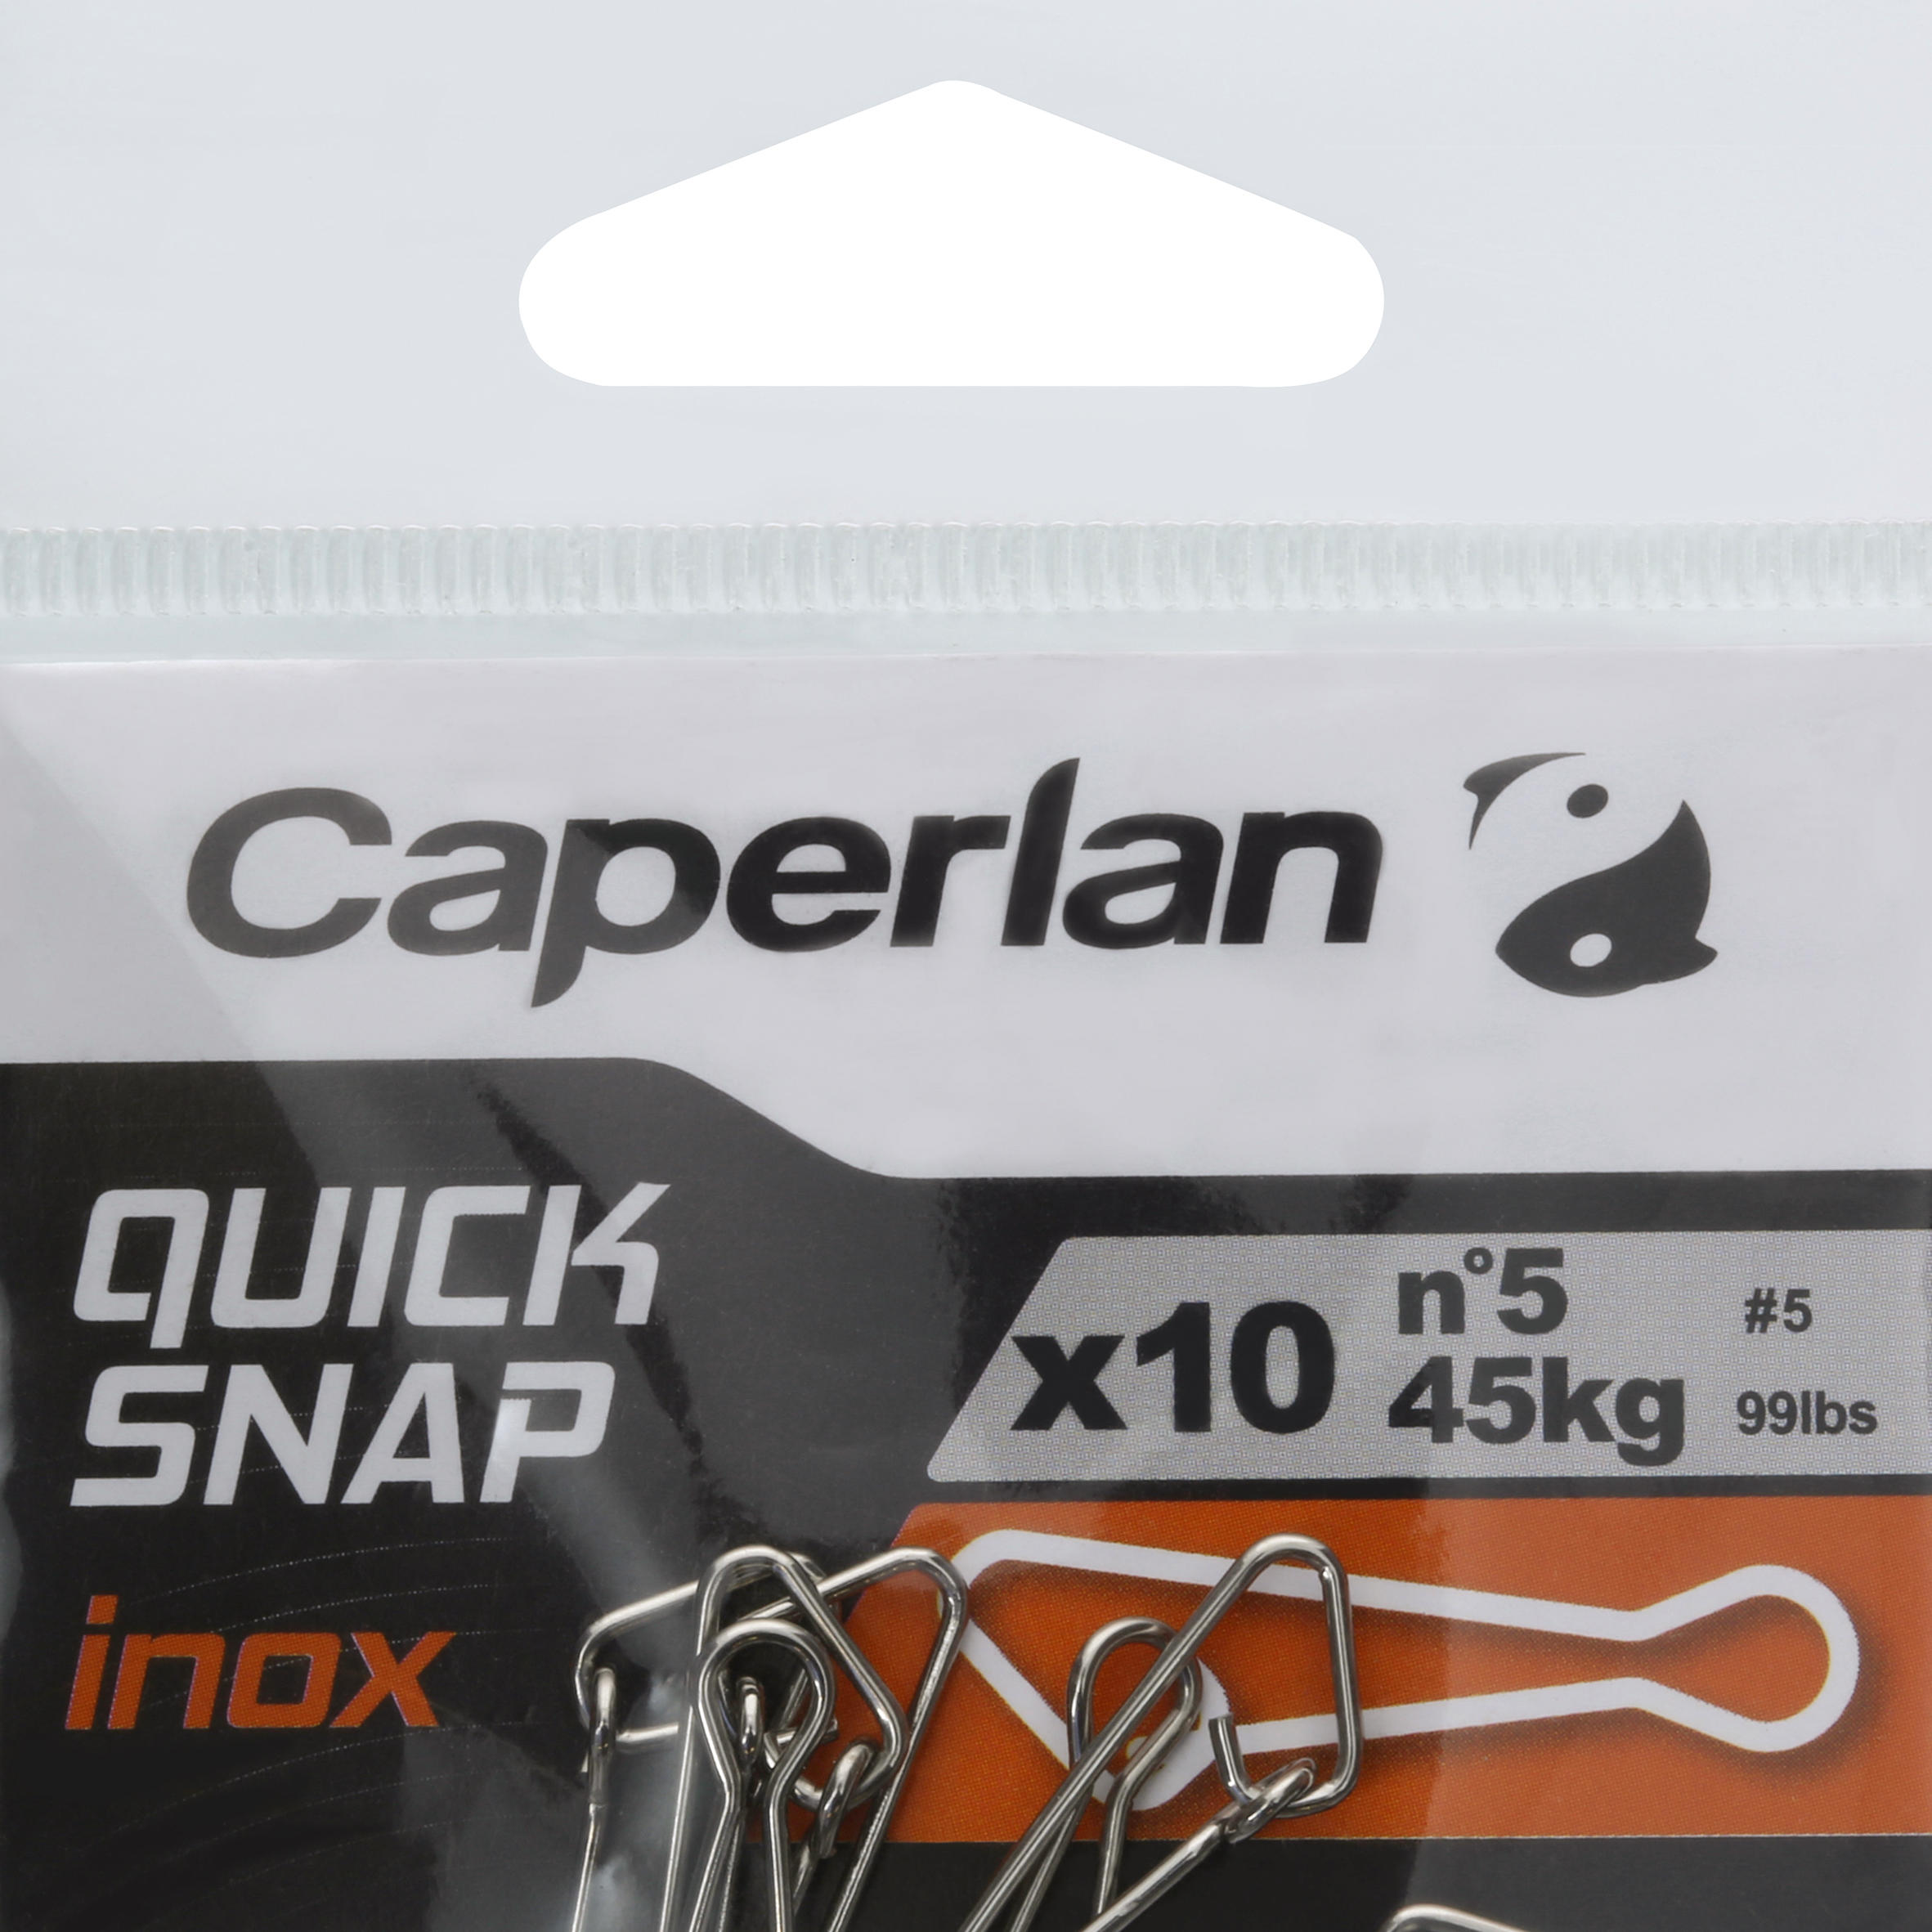 STAINLESS STEEL QUICK SNAP FISHING CLIP X10 5/6